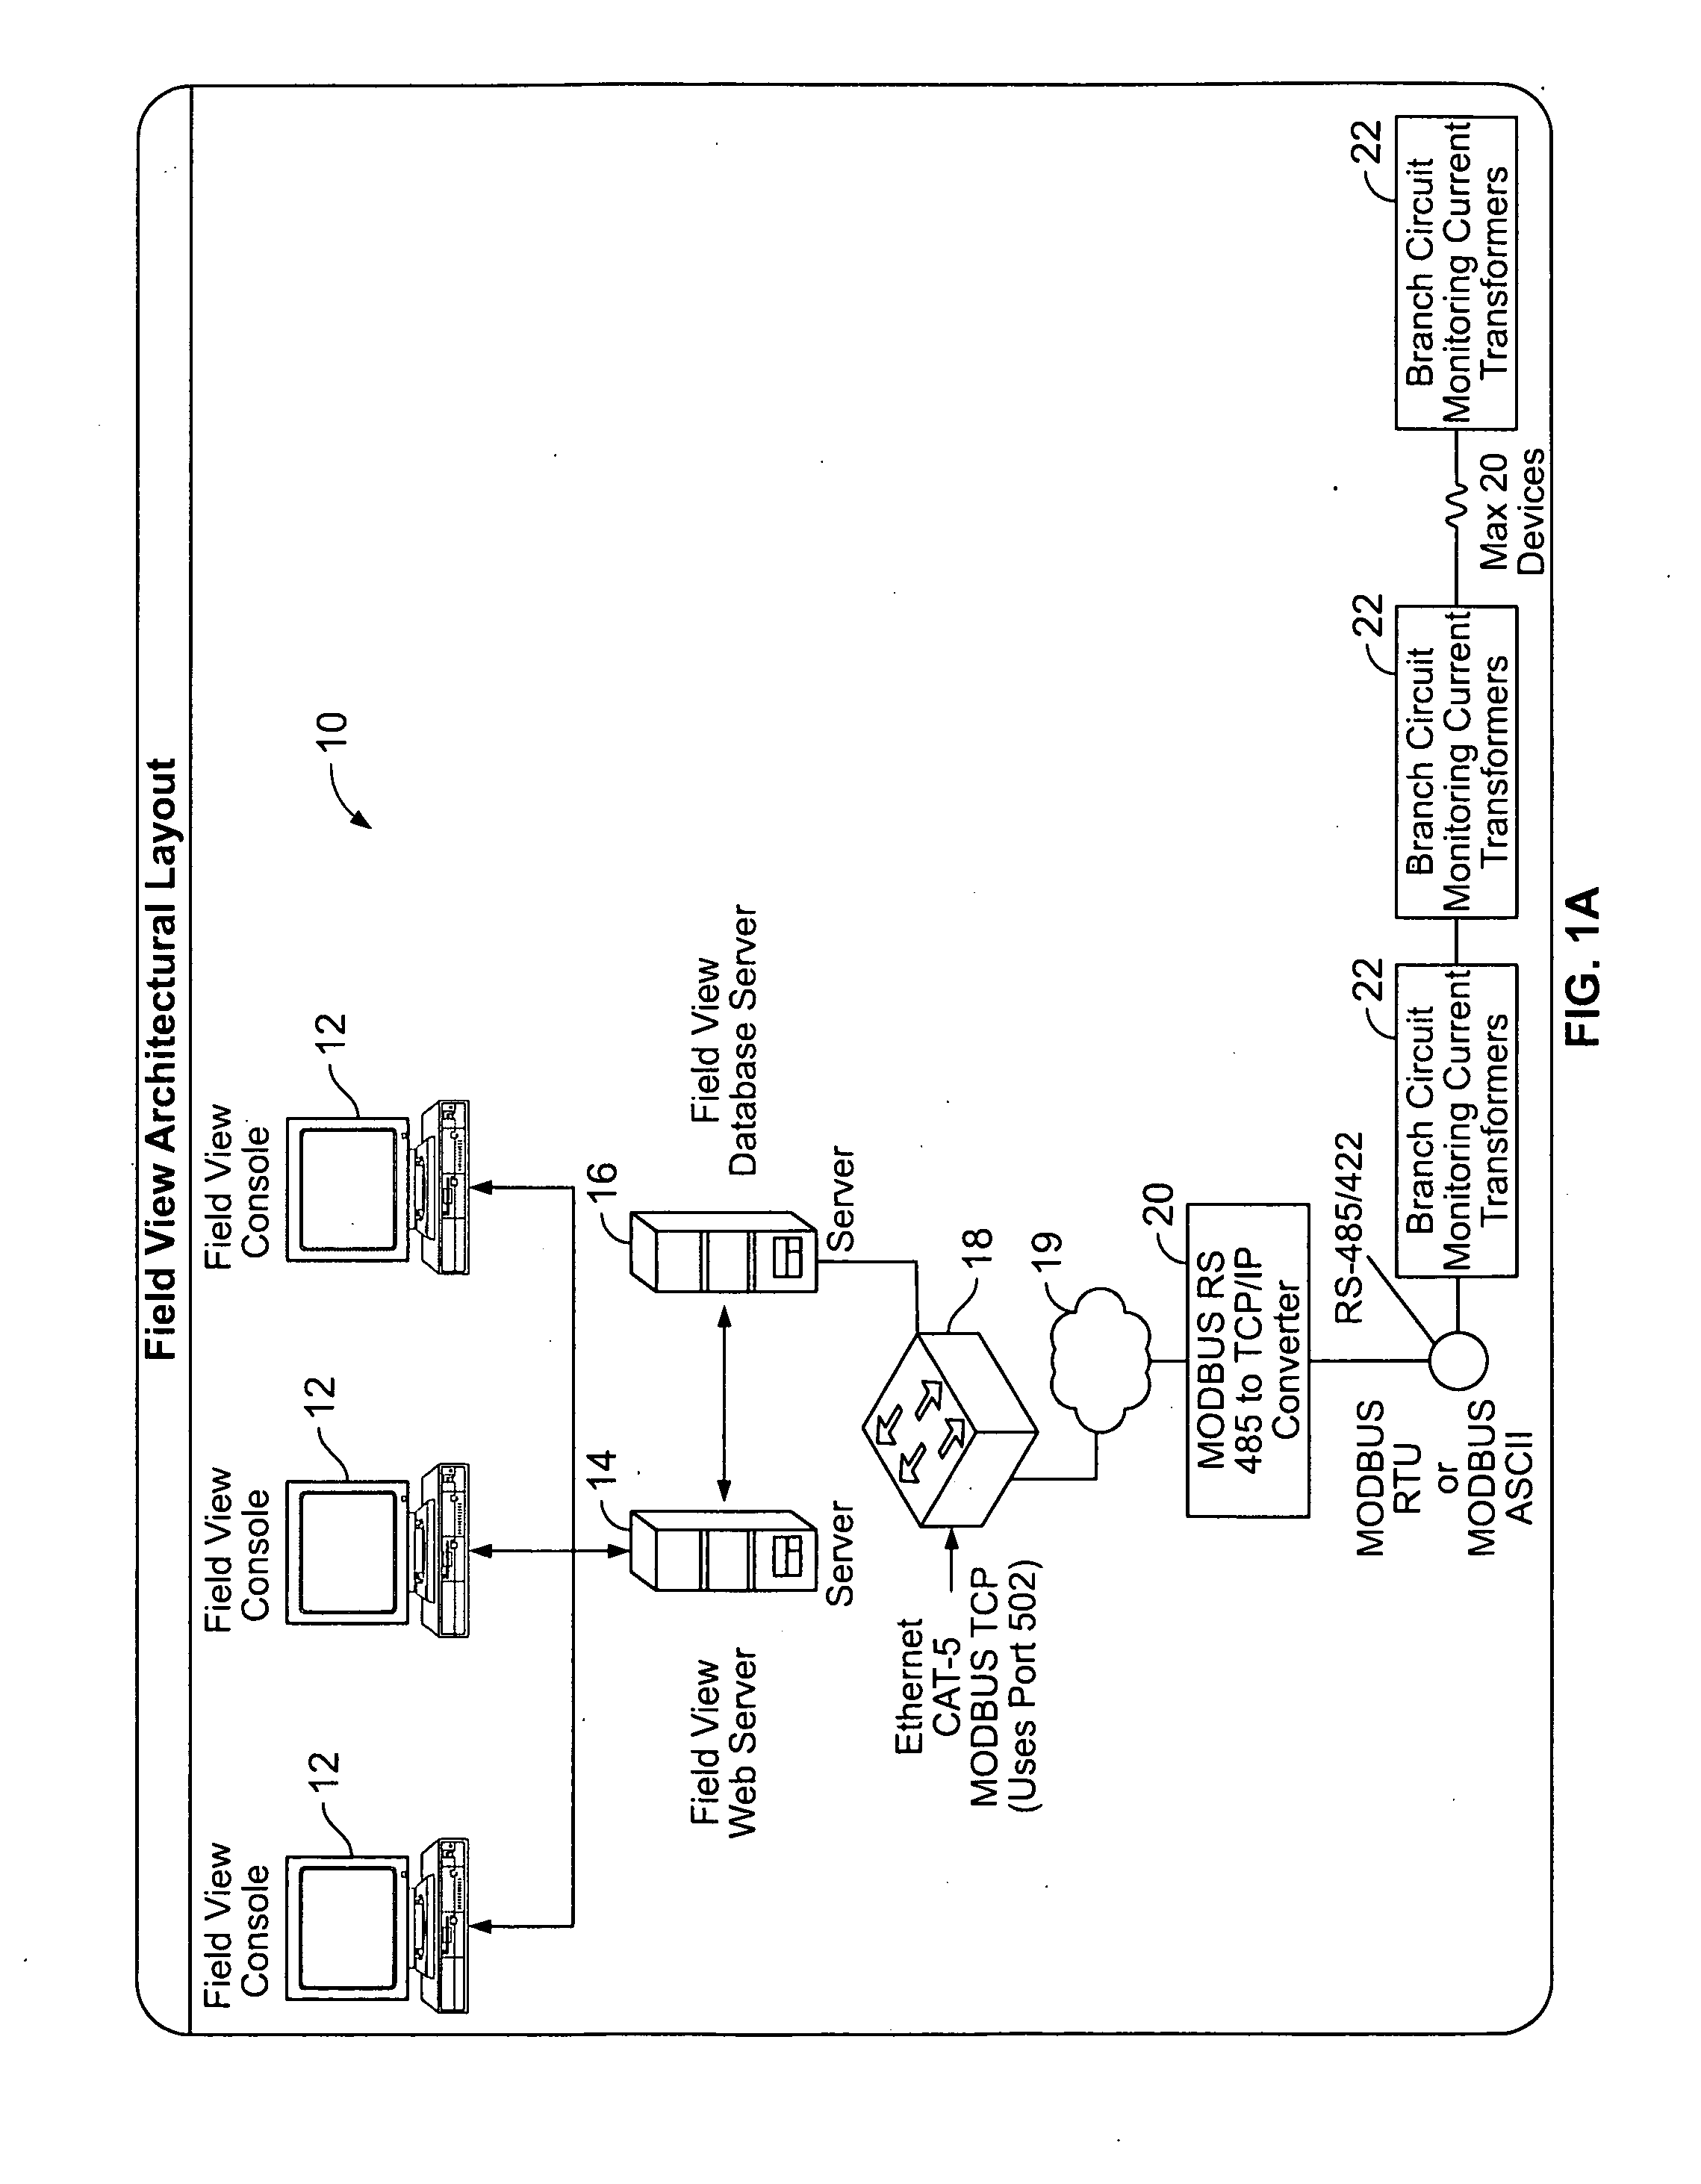 System and Method for Rack management and Capacity Planning